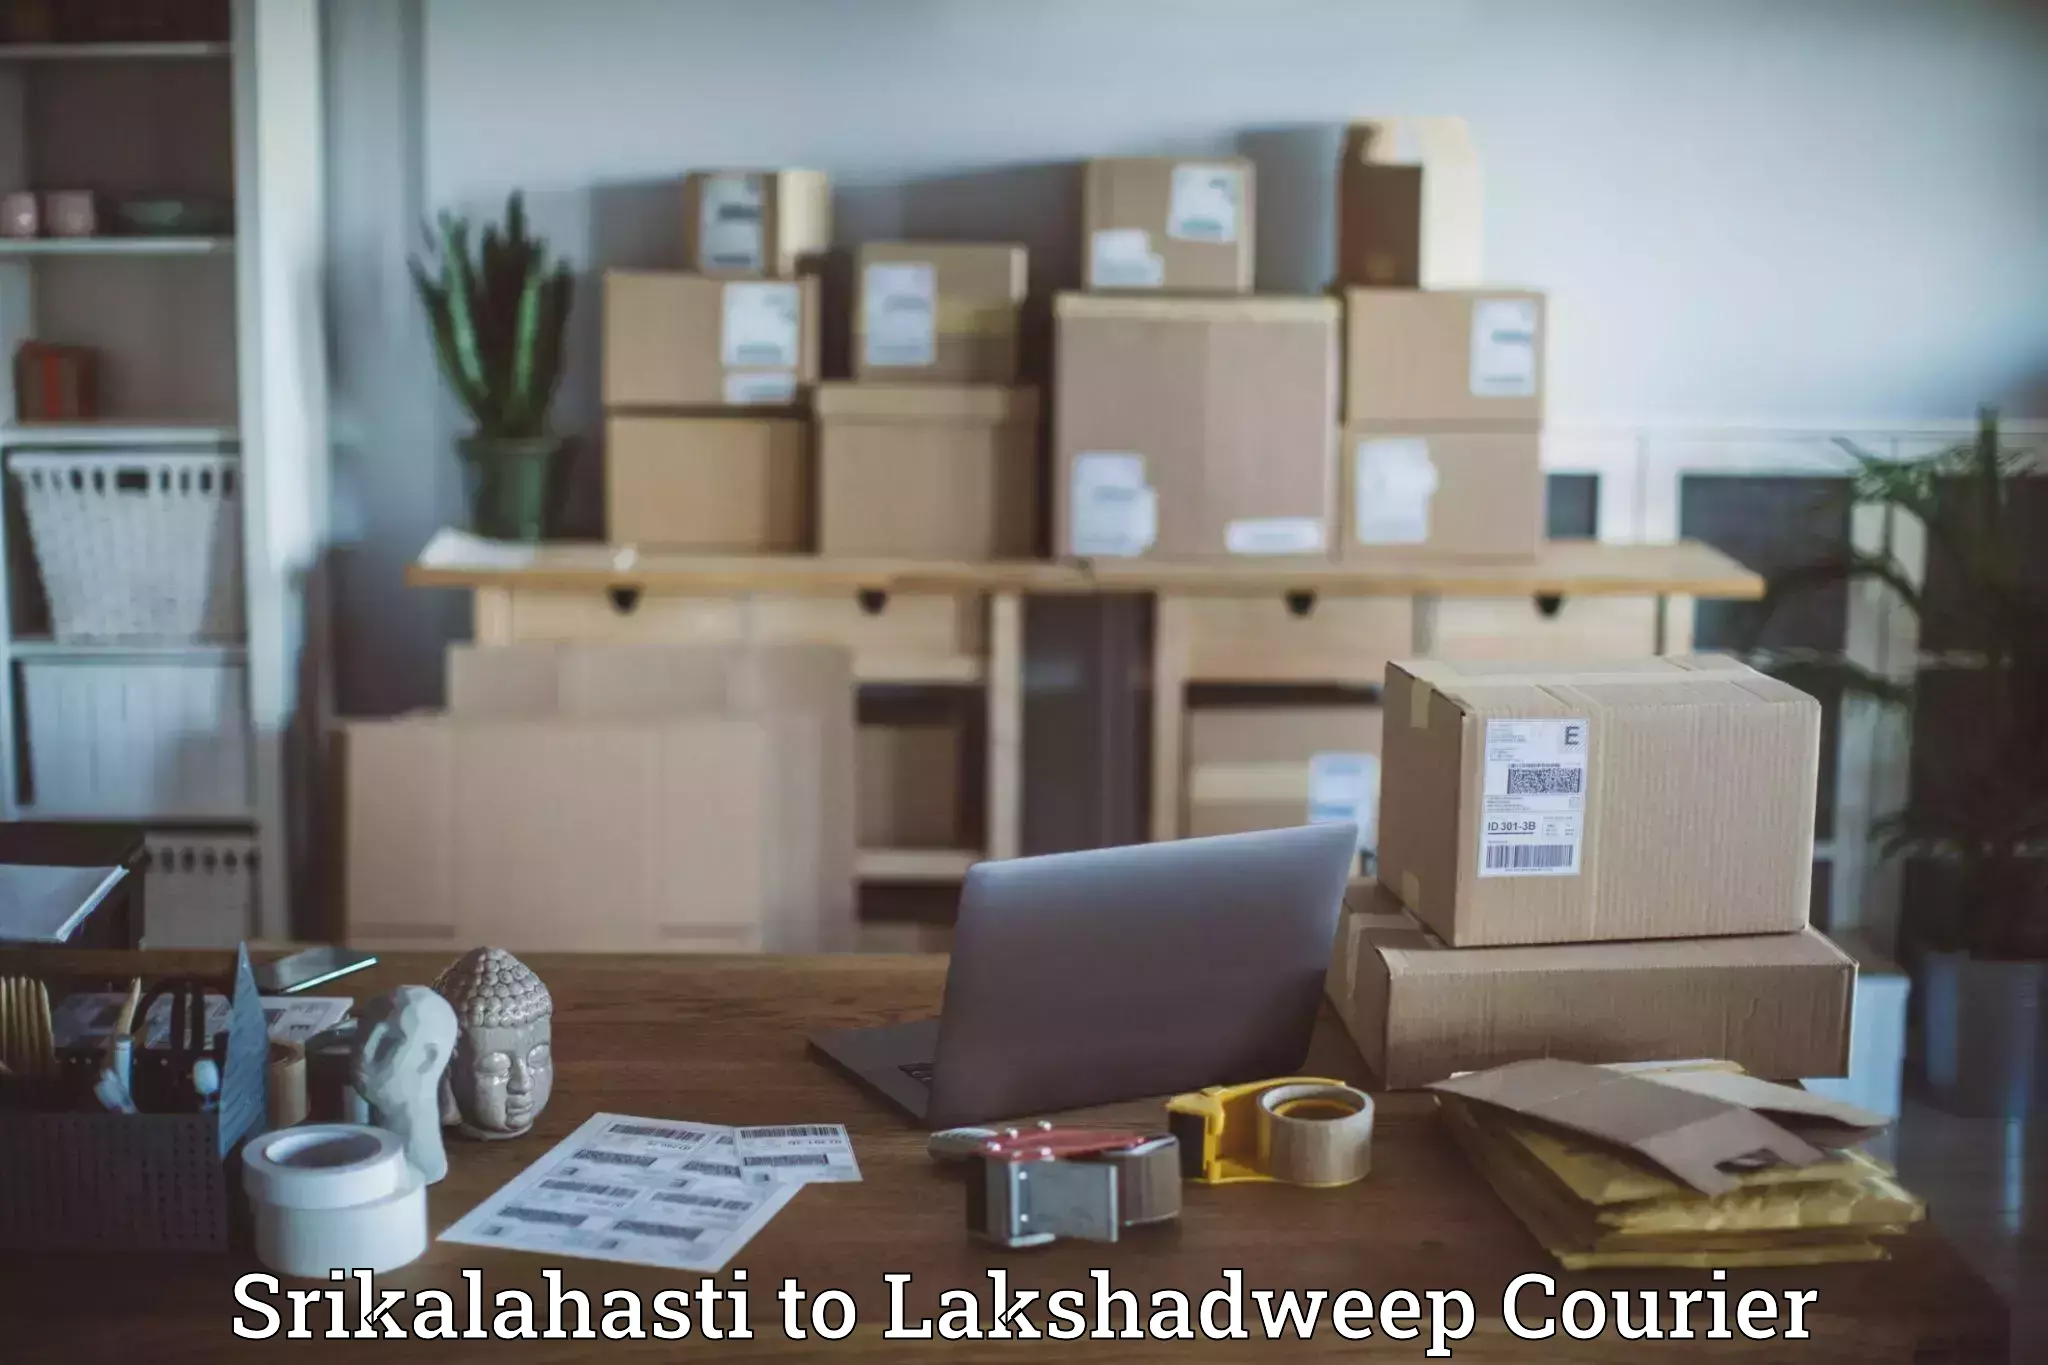 Easy access courier services in Srikalahasti to Lakshadweep